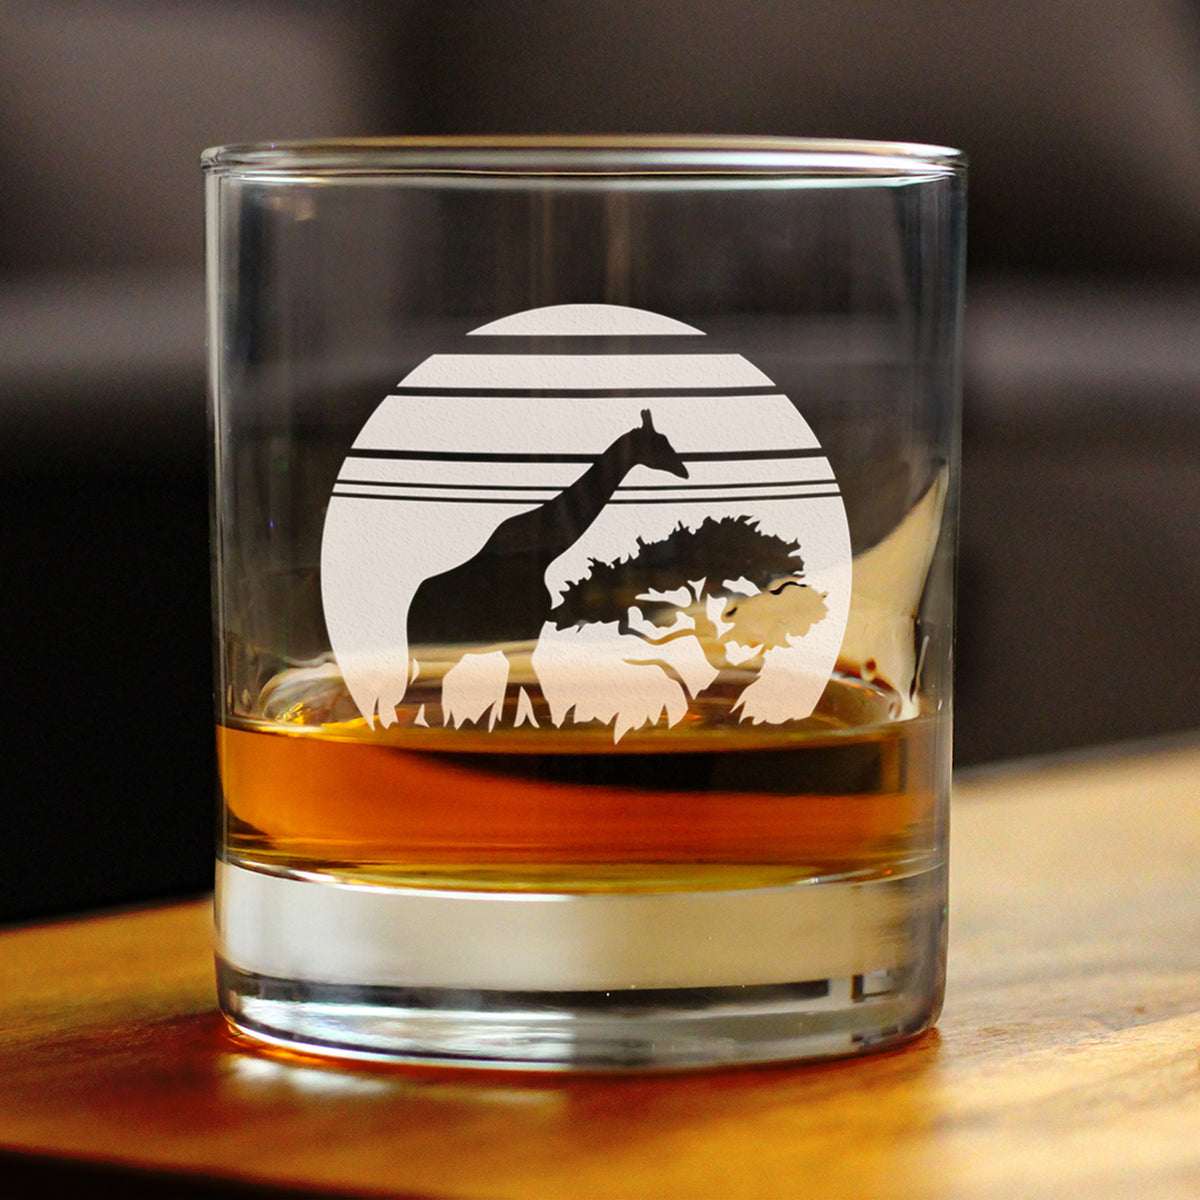 Giraffe Sunset Whiskey Rocks Glass - Fun Safari Themed Decor and Gifts for Lovers of African Wild Animals - 10.25 Oz Glasses